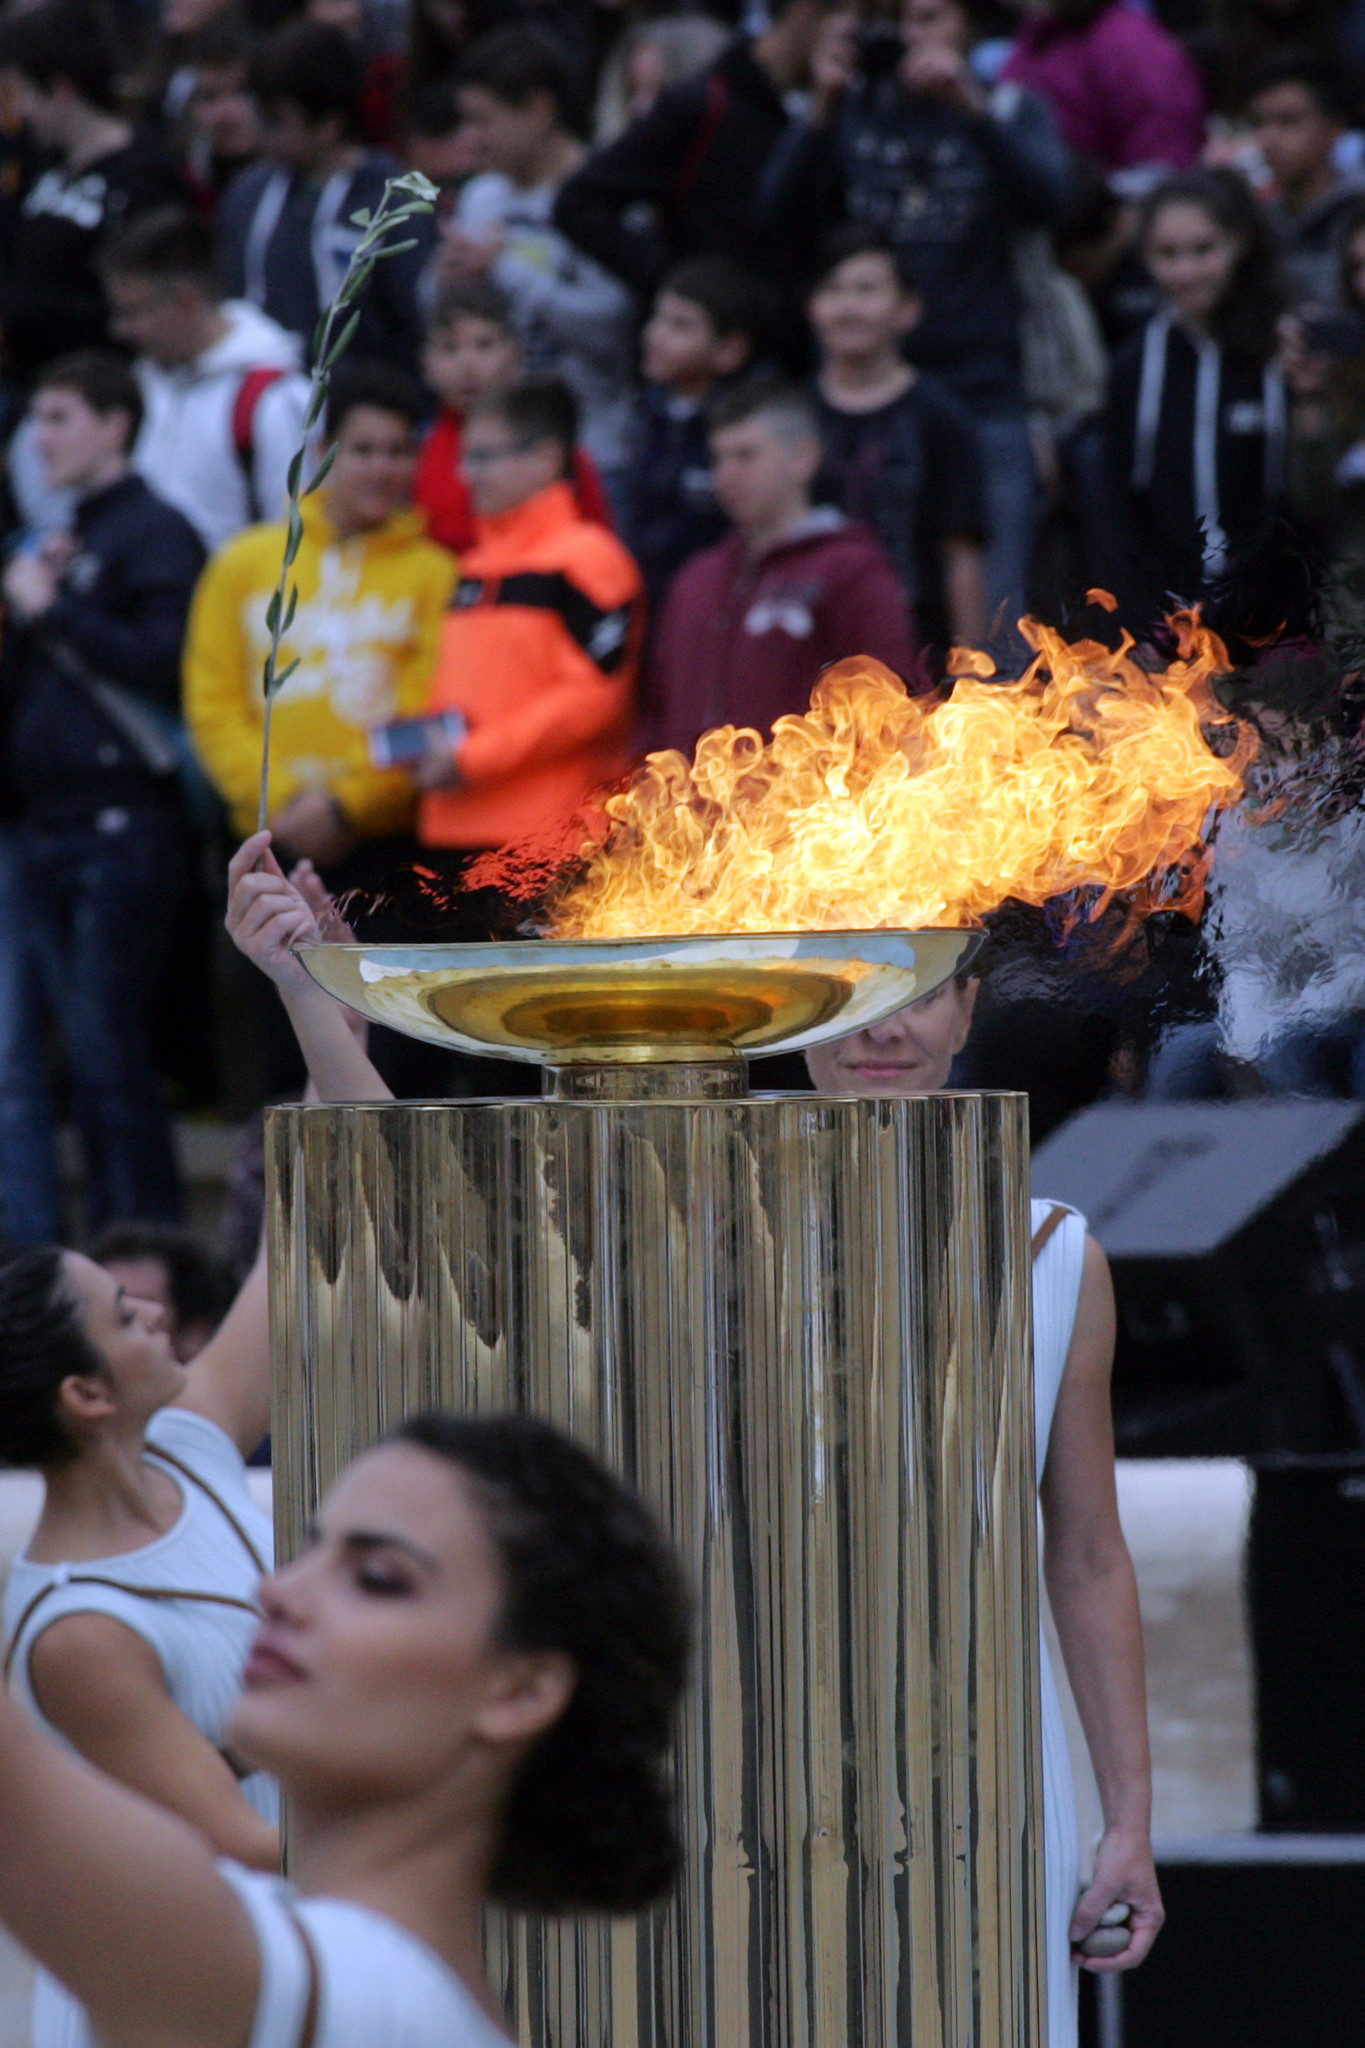 Actresses dance as the flame burns brightly ©Getty Images